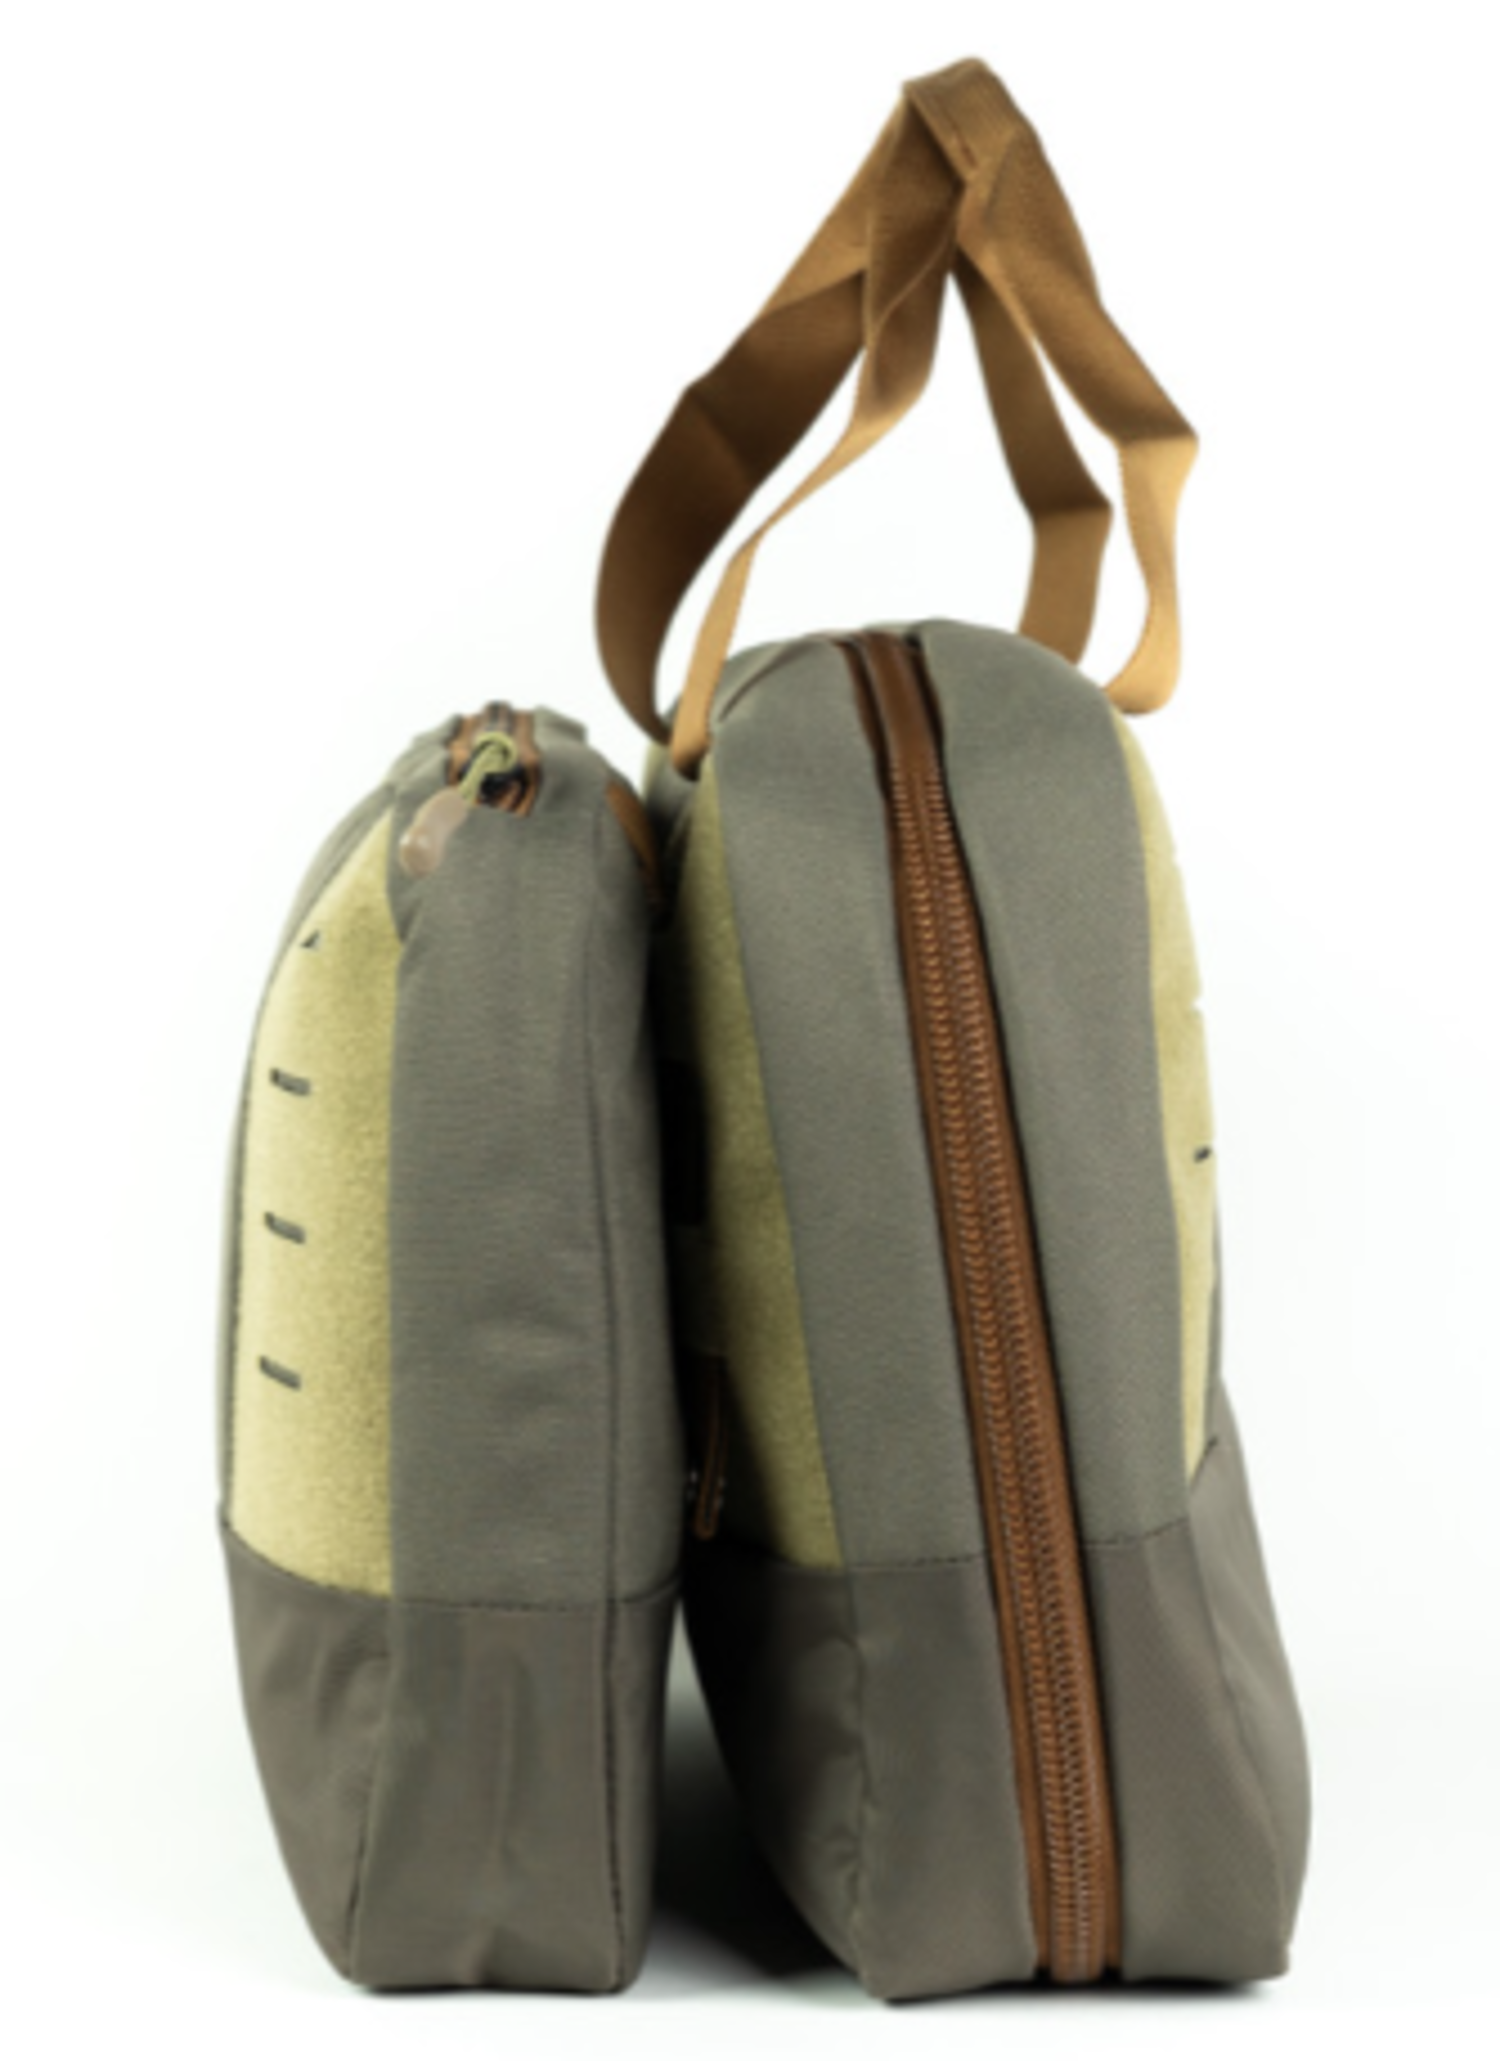 ZS2 Traveler Fly Tying Kit Bag- Olive - The Fish Hawk